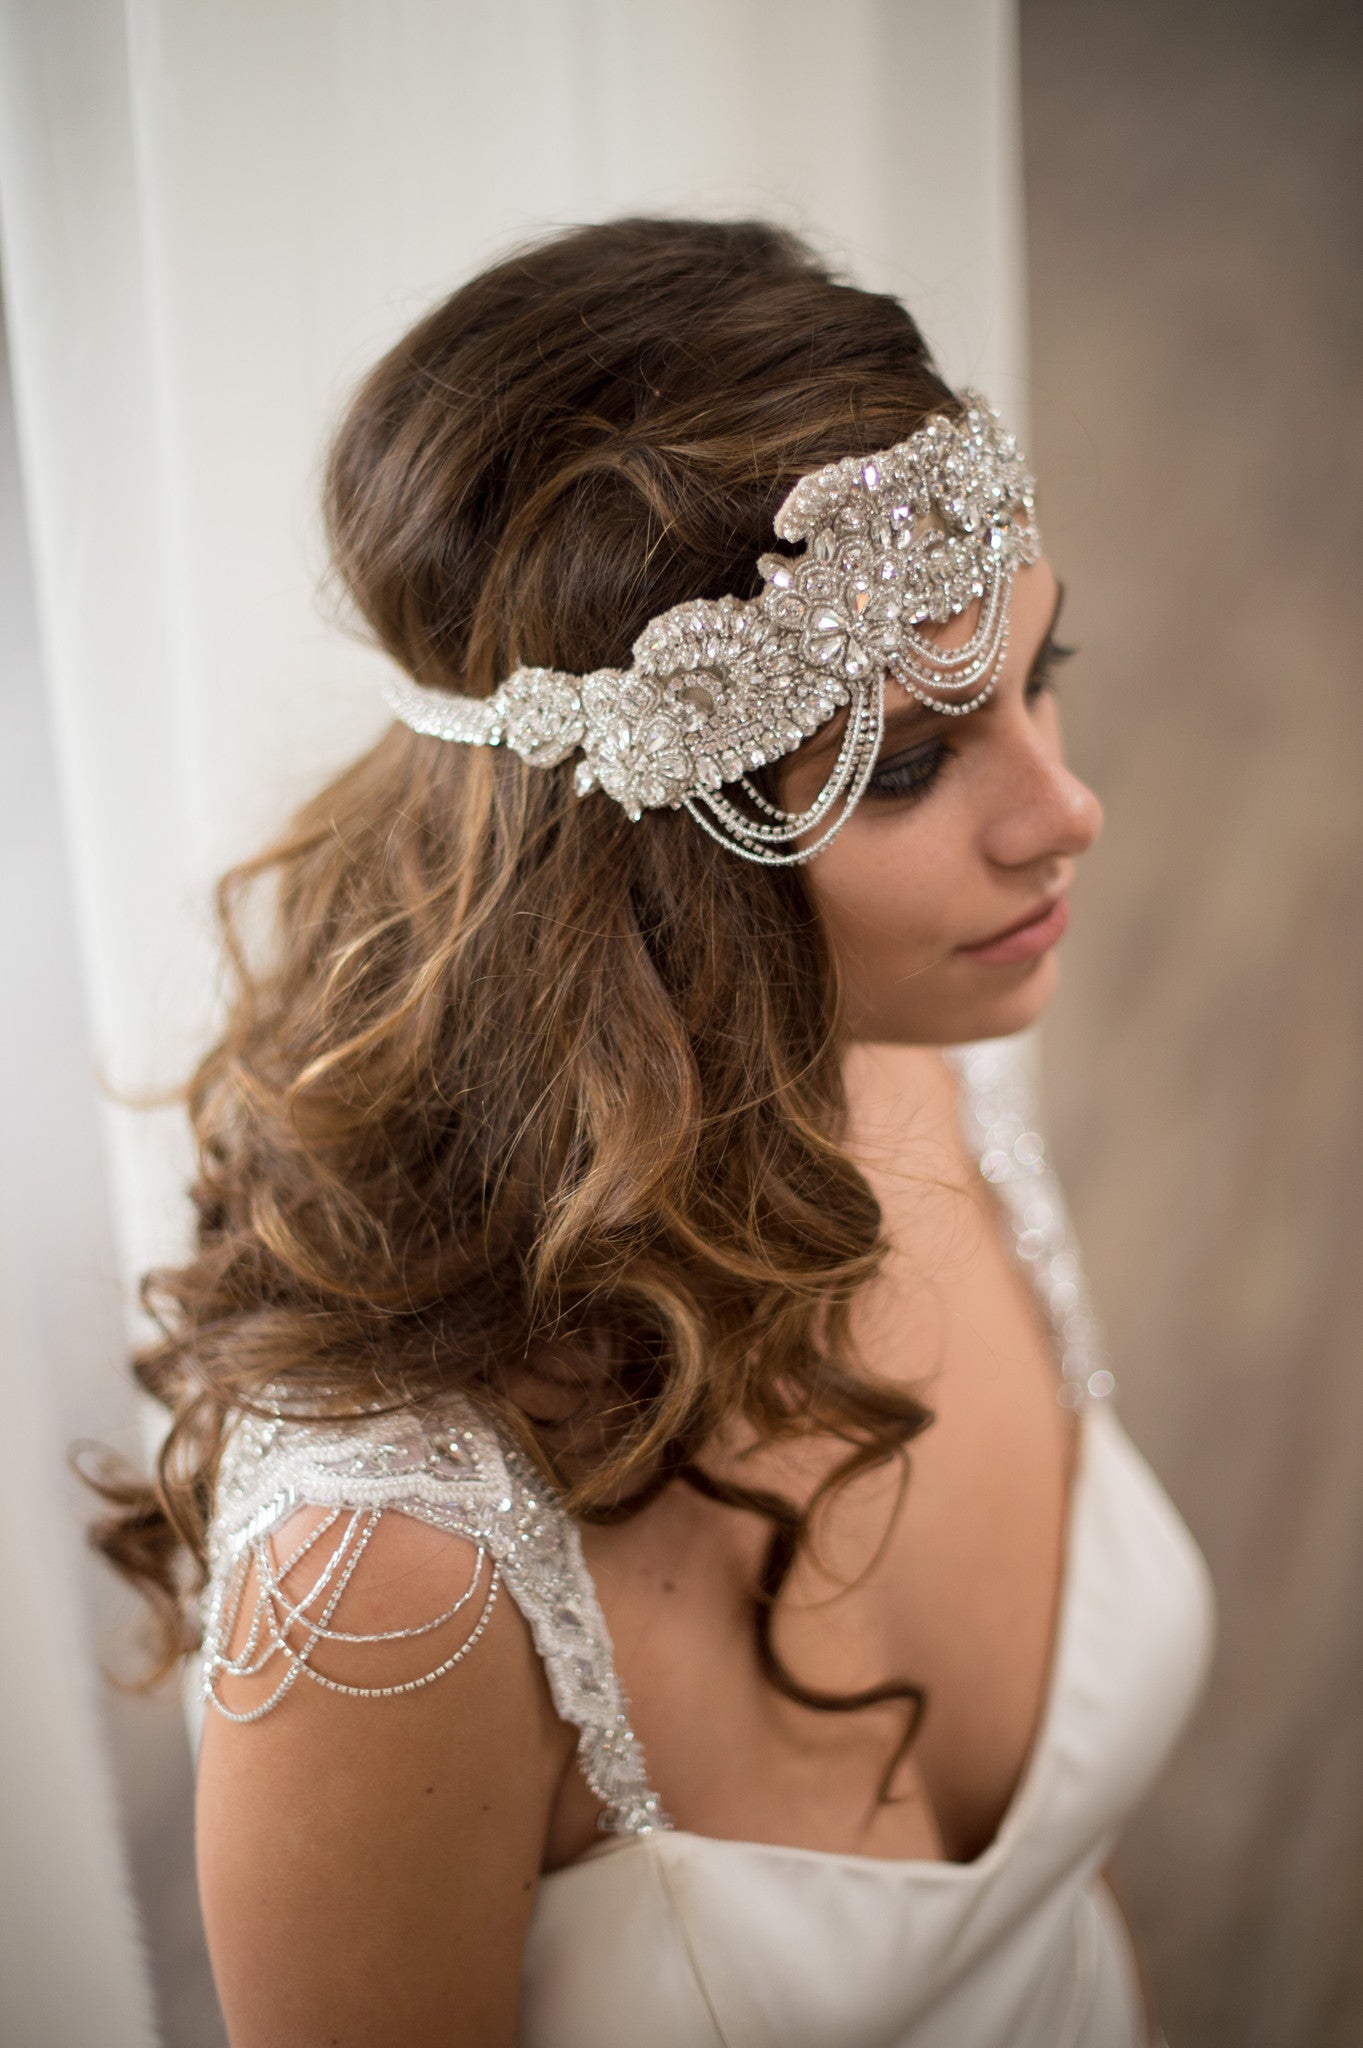 Bridal Accessories and Wedding Jewelry, Camilla Christine, Headpiece, Headdress, Halo, Faith Headpiece, Silver, Great Gatsby Inspired Floral & Vine Design wtih Crystal Chain Swag Headpiece